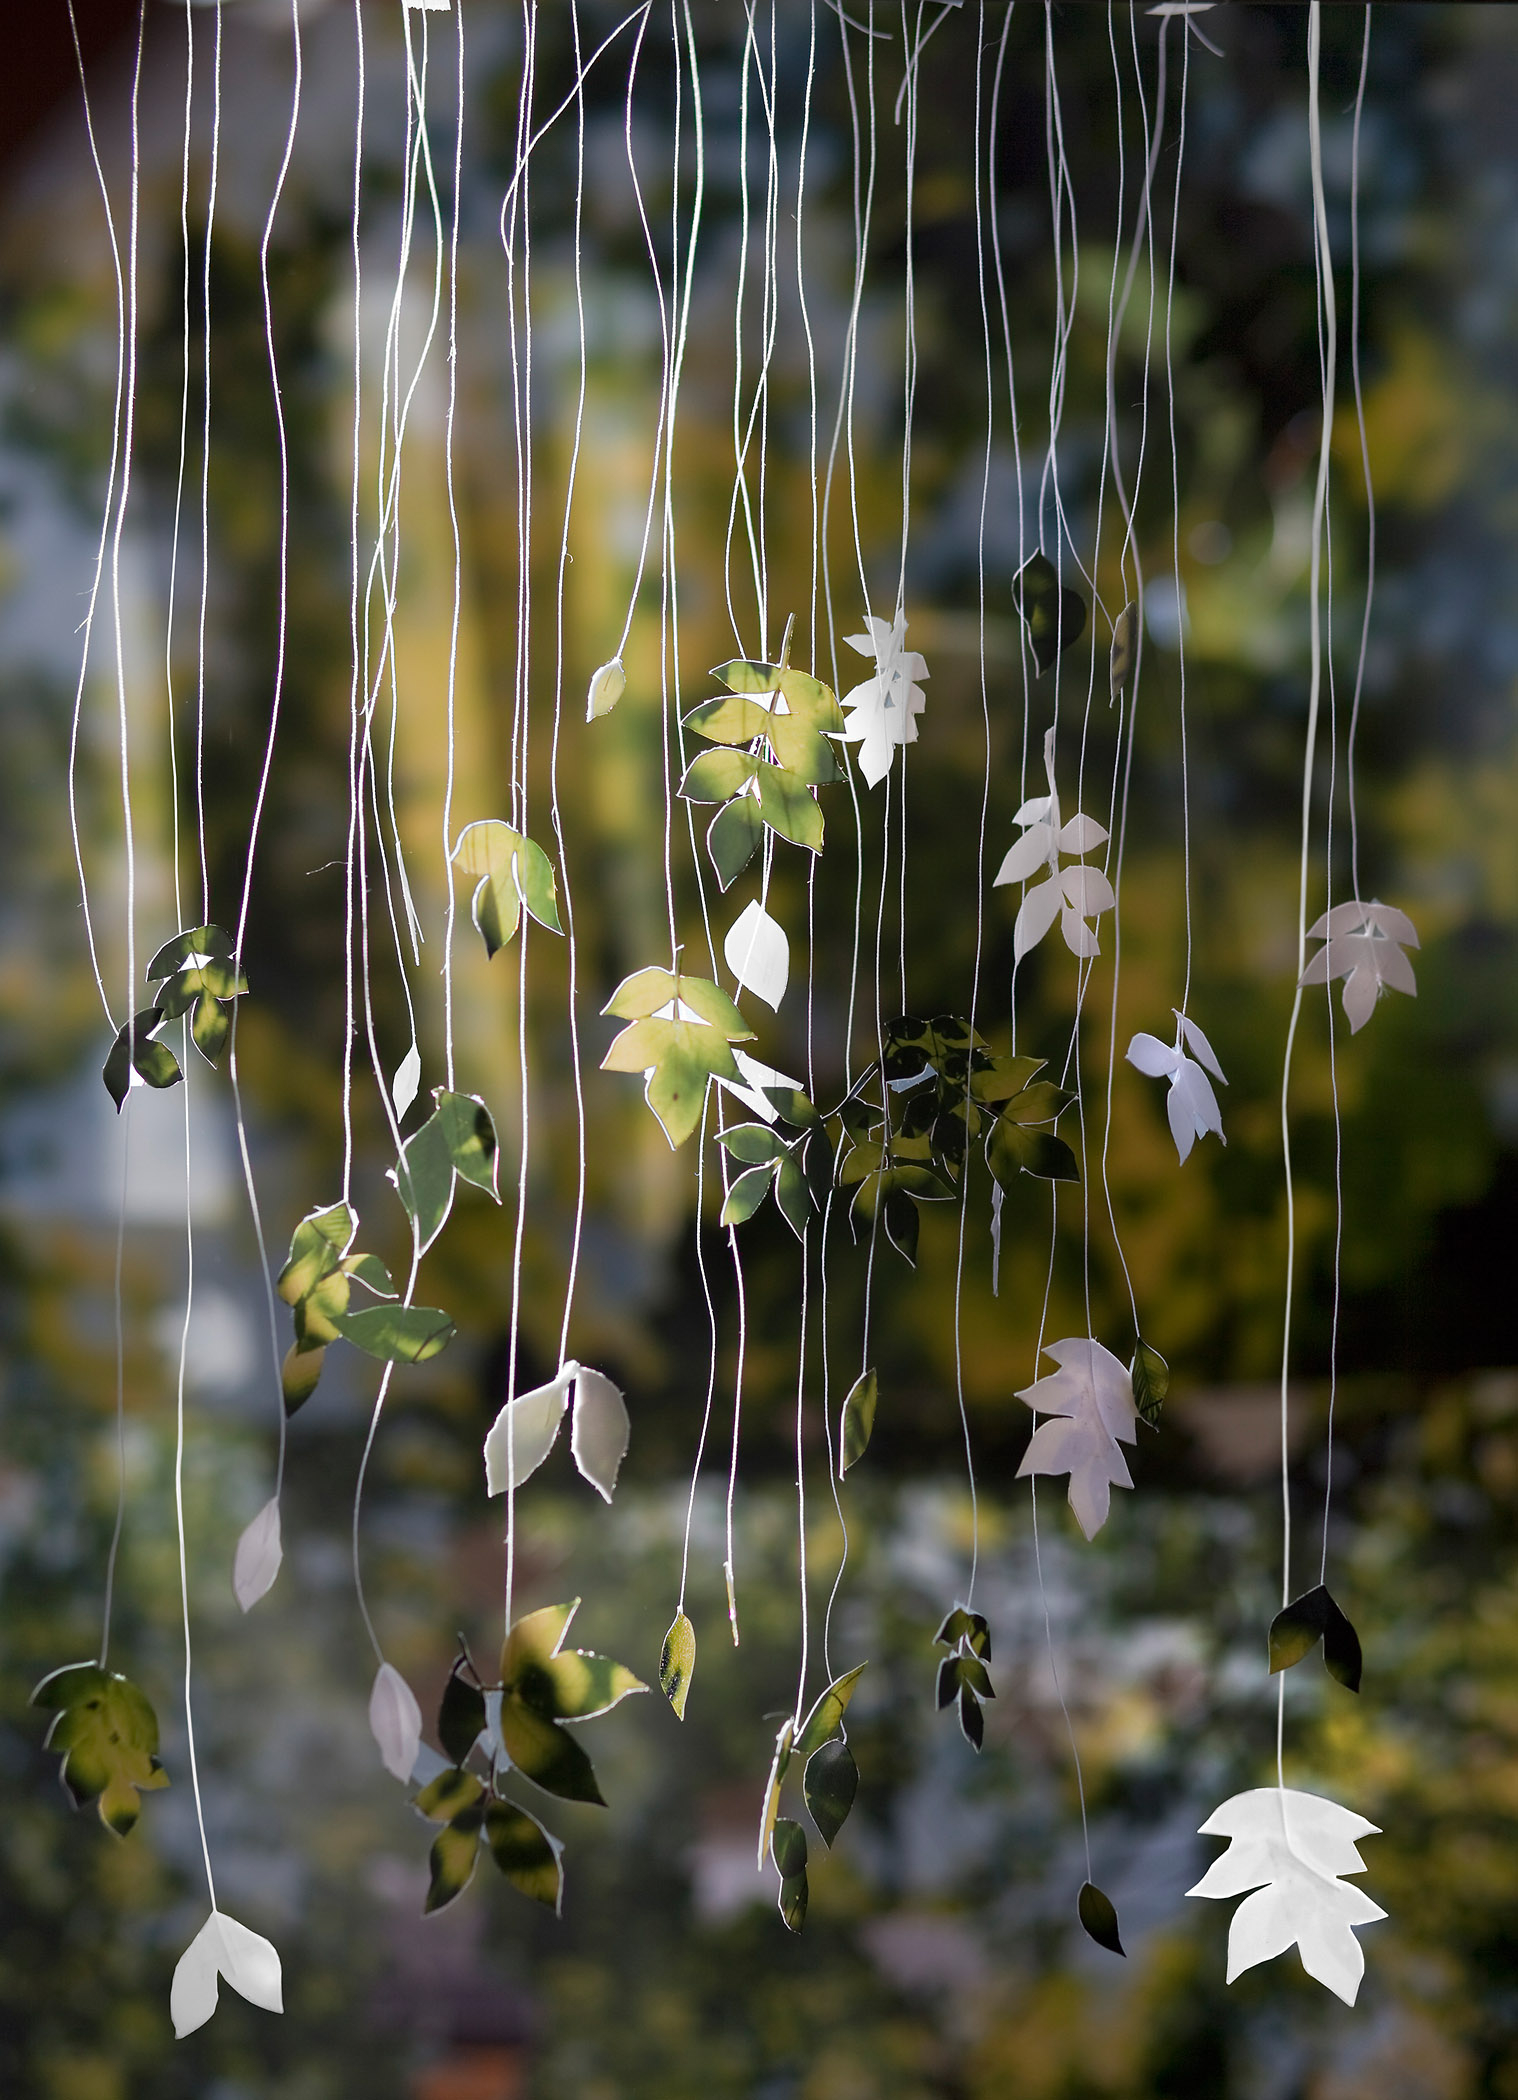     Becky Comber, Loose Leaves, from the series Broken Horizons, 2014 

